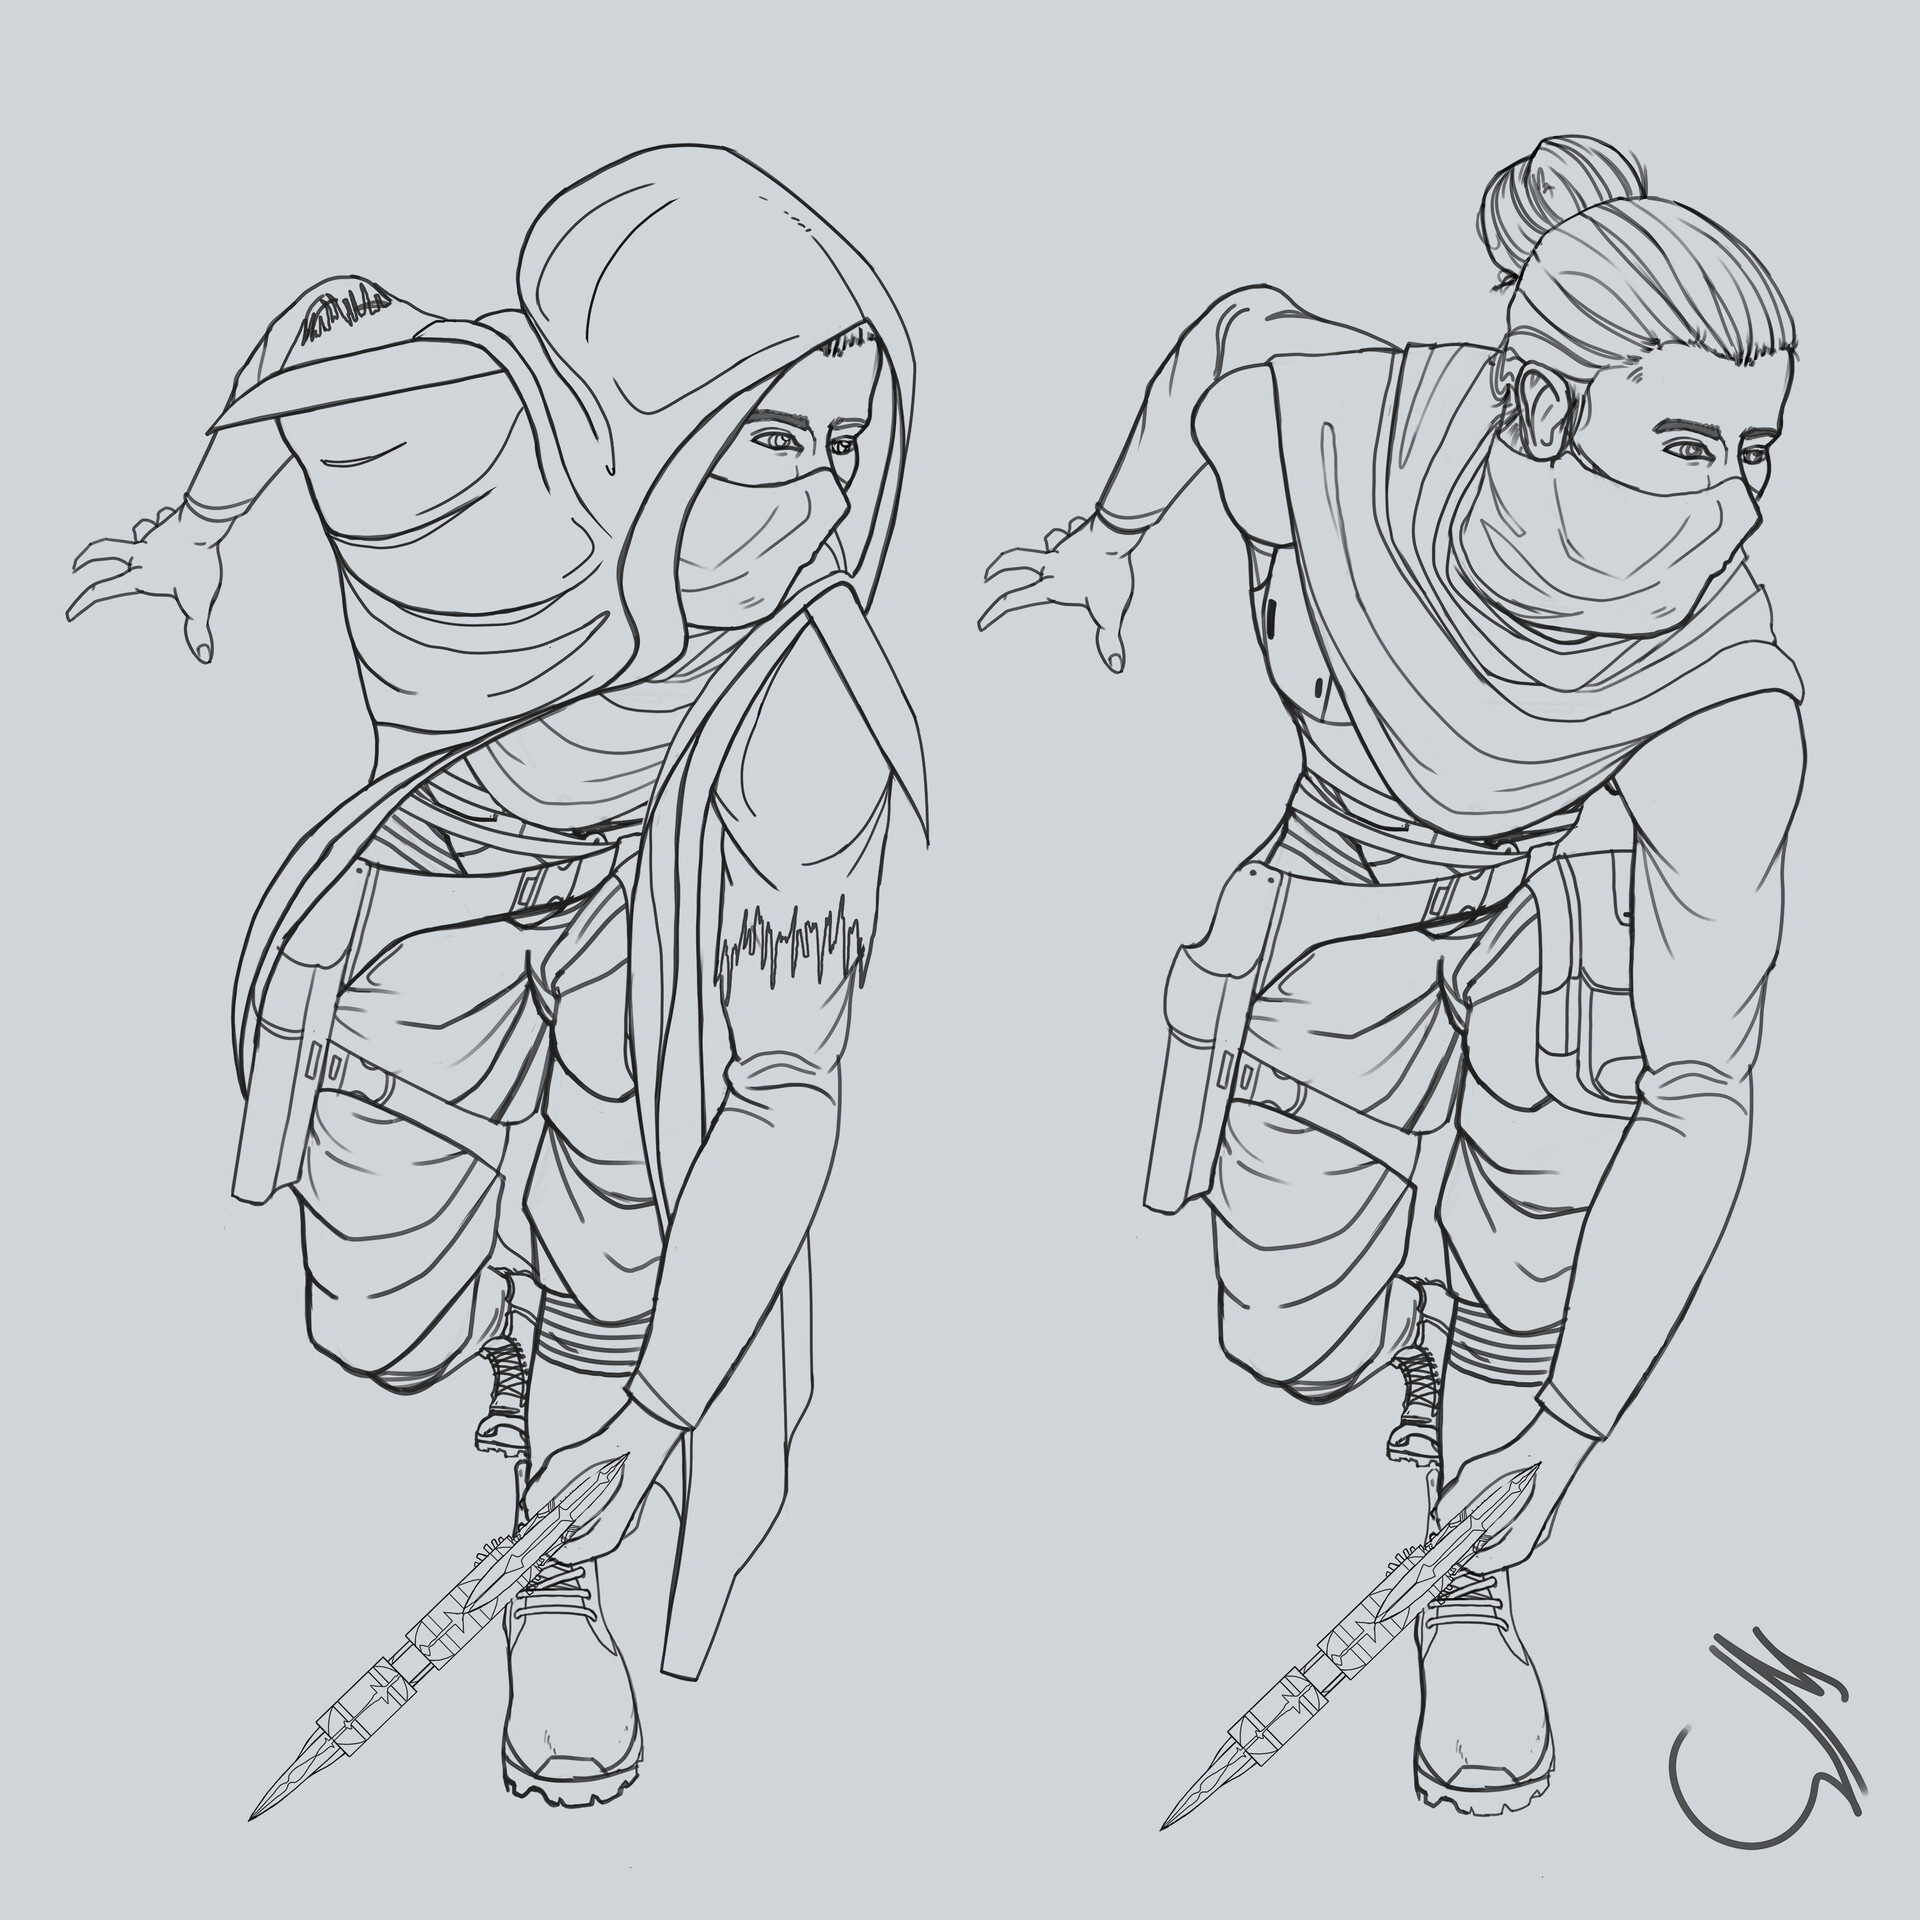 Hyper-detailed character concept sketch on Craiyon